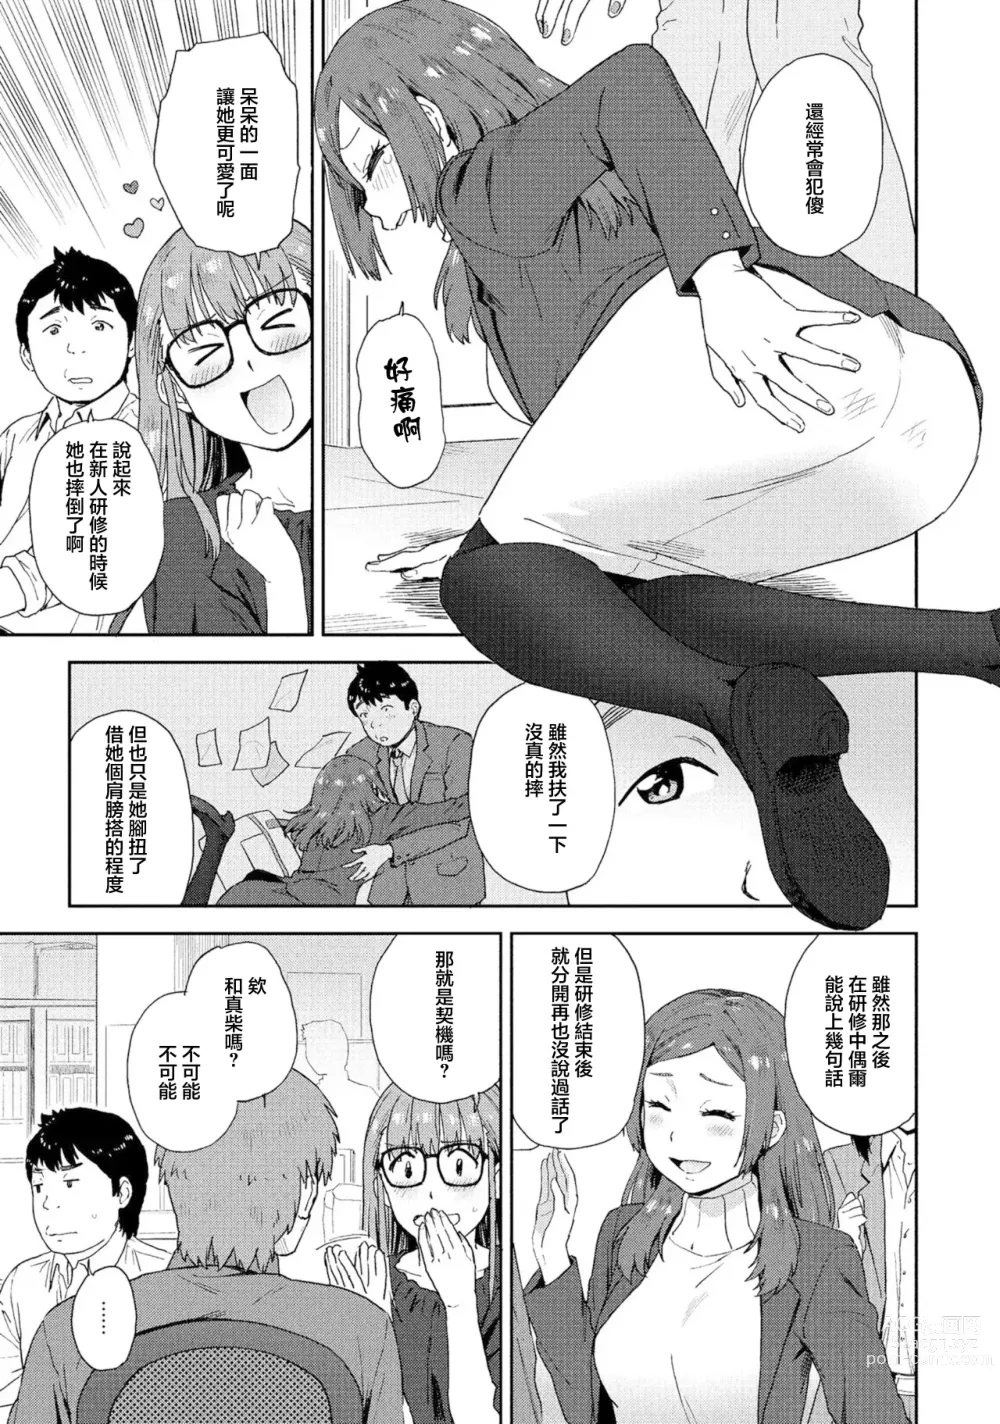 Page 3 of doujinshi 可靠依賴性